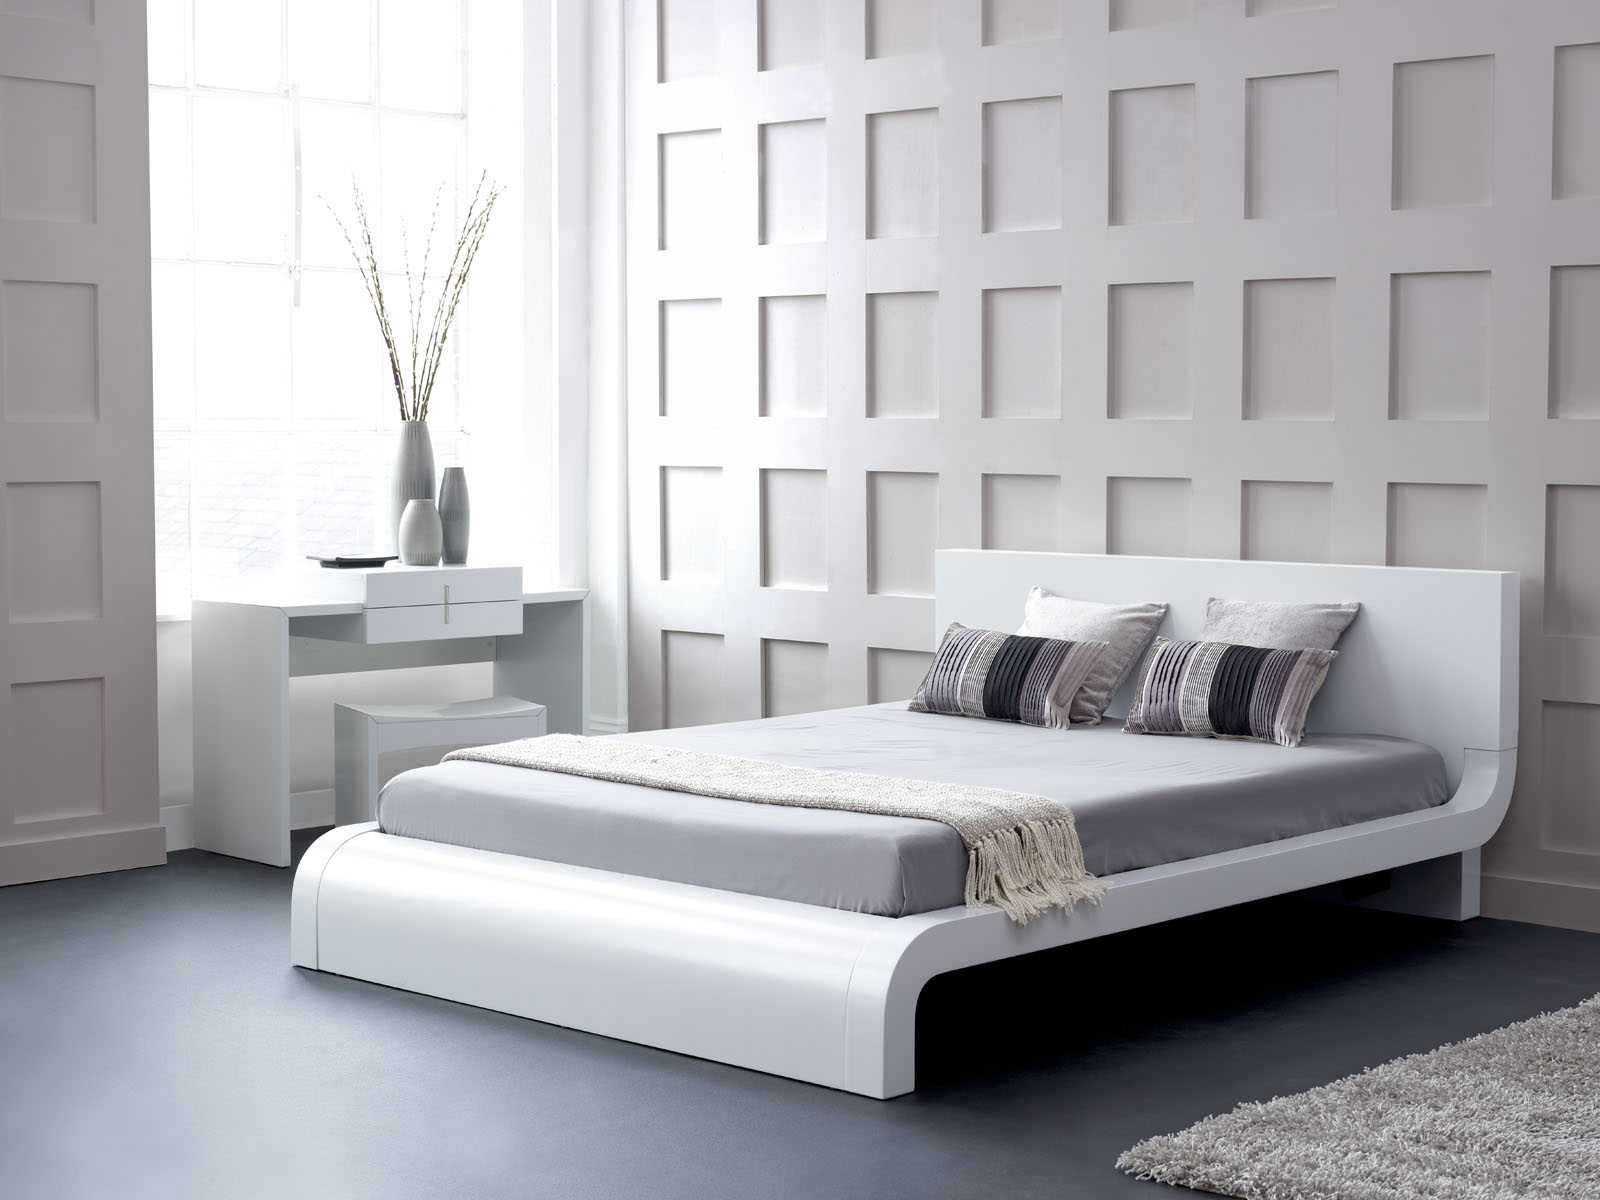 Wall Design Bedroom Captivating Wall Design Of Contemporary Bedroom Completed By Queen Bed With Elegant Platform Furnished With Desk Of White Bedroom Furniture And Coupled With Tiny Chair Bedroom 15 Simple White Bedroom Furniture For Your Romantic Modern House